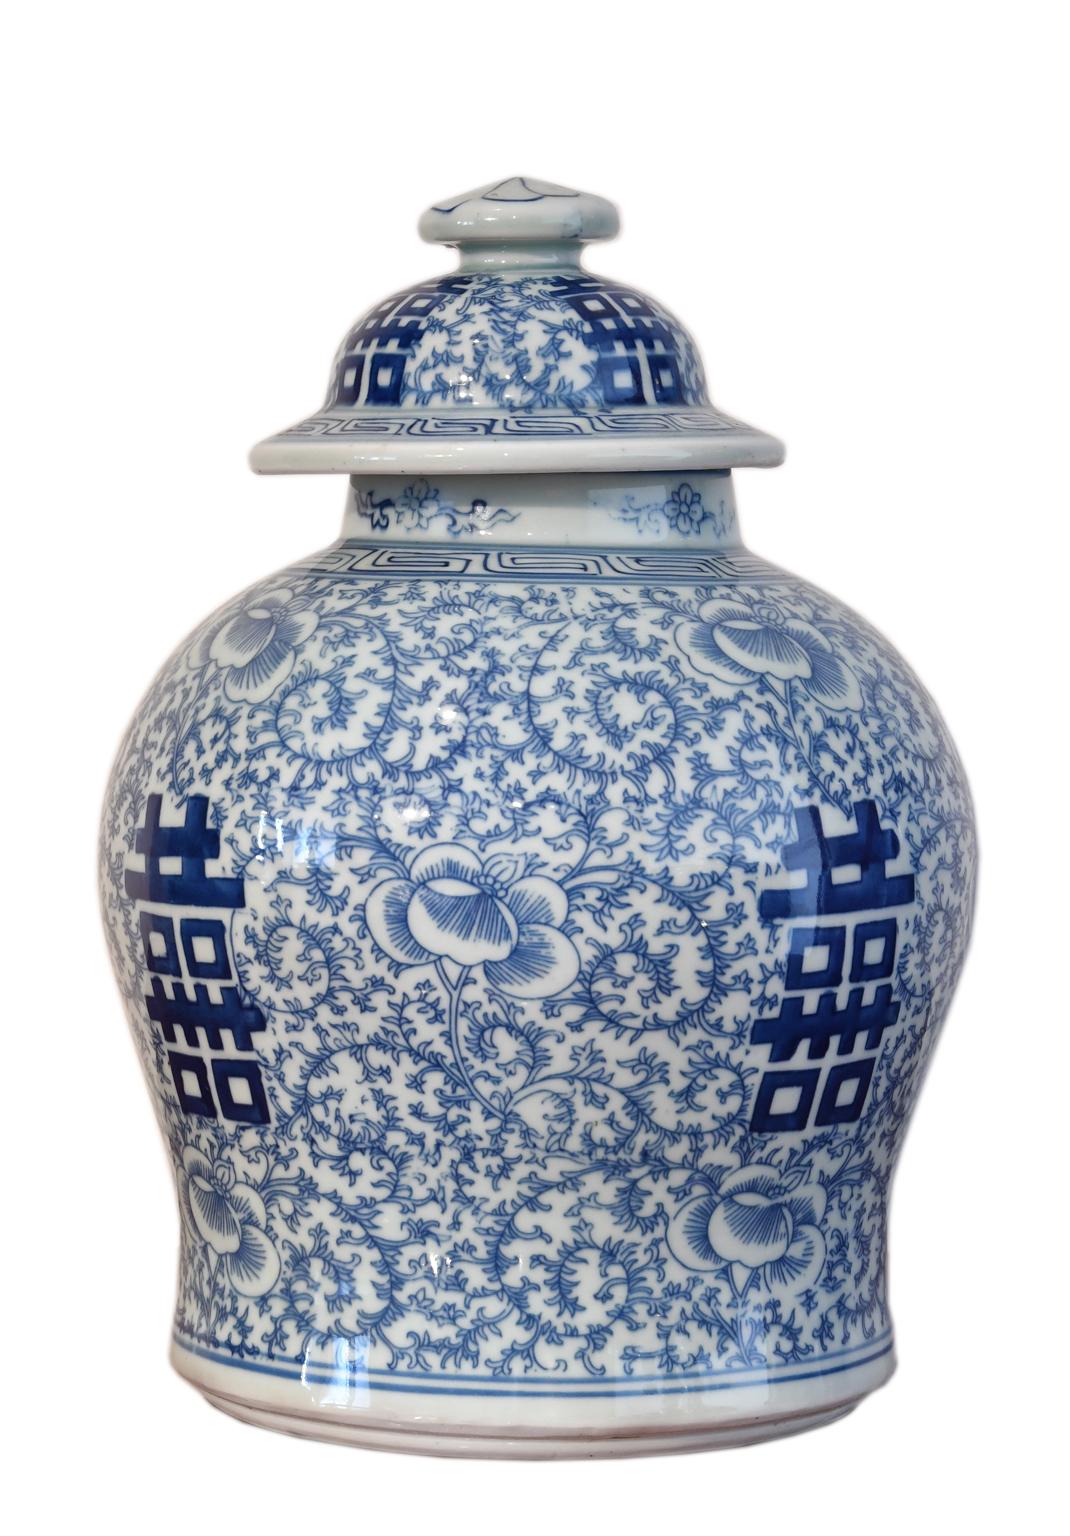 A handsome Chinese porcelain lidded-urn or jar with baluster-form, and hand painted cobalt blue decoration of 